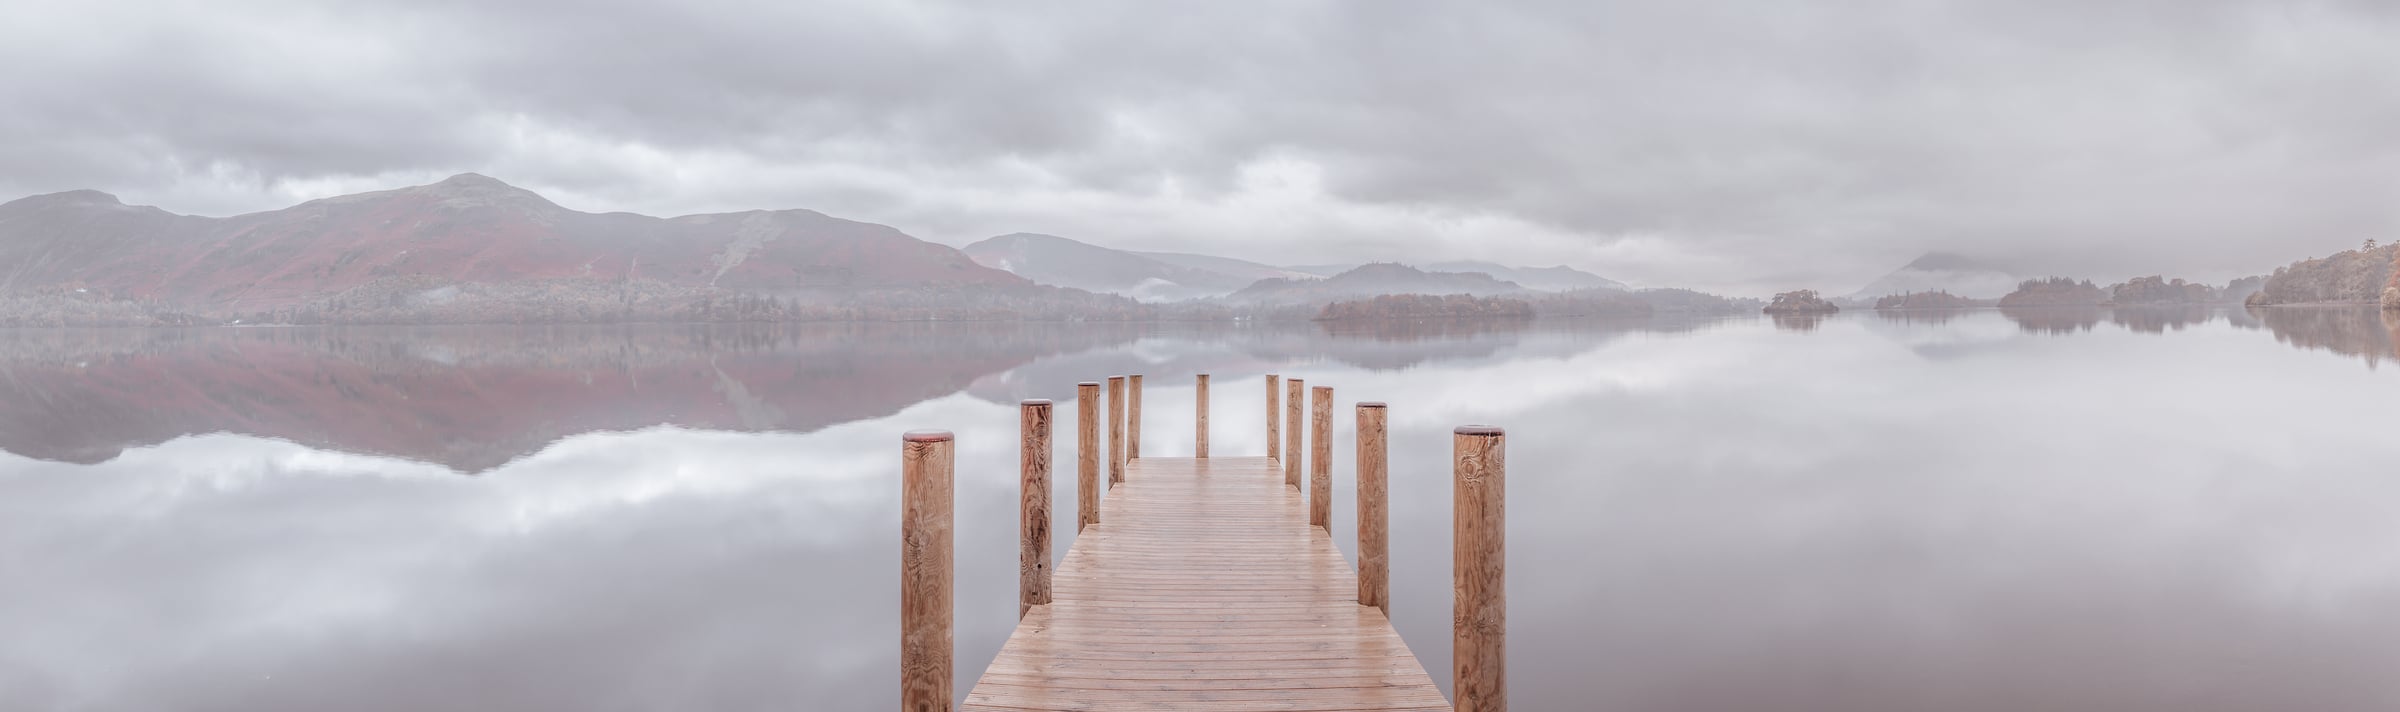 204 megapixels! A very high resolution, large-format VAST photo print of a peaceful water scene with a wood pier going into a calm lake with mountains in the background; panorama photograph created by Assaf Frank in Derwentwater pier, Lake District National Park, Cumbria, United Kingdom.